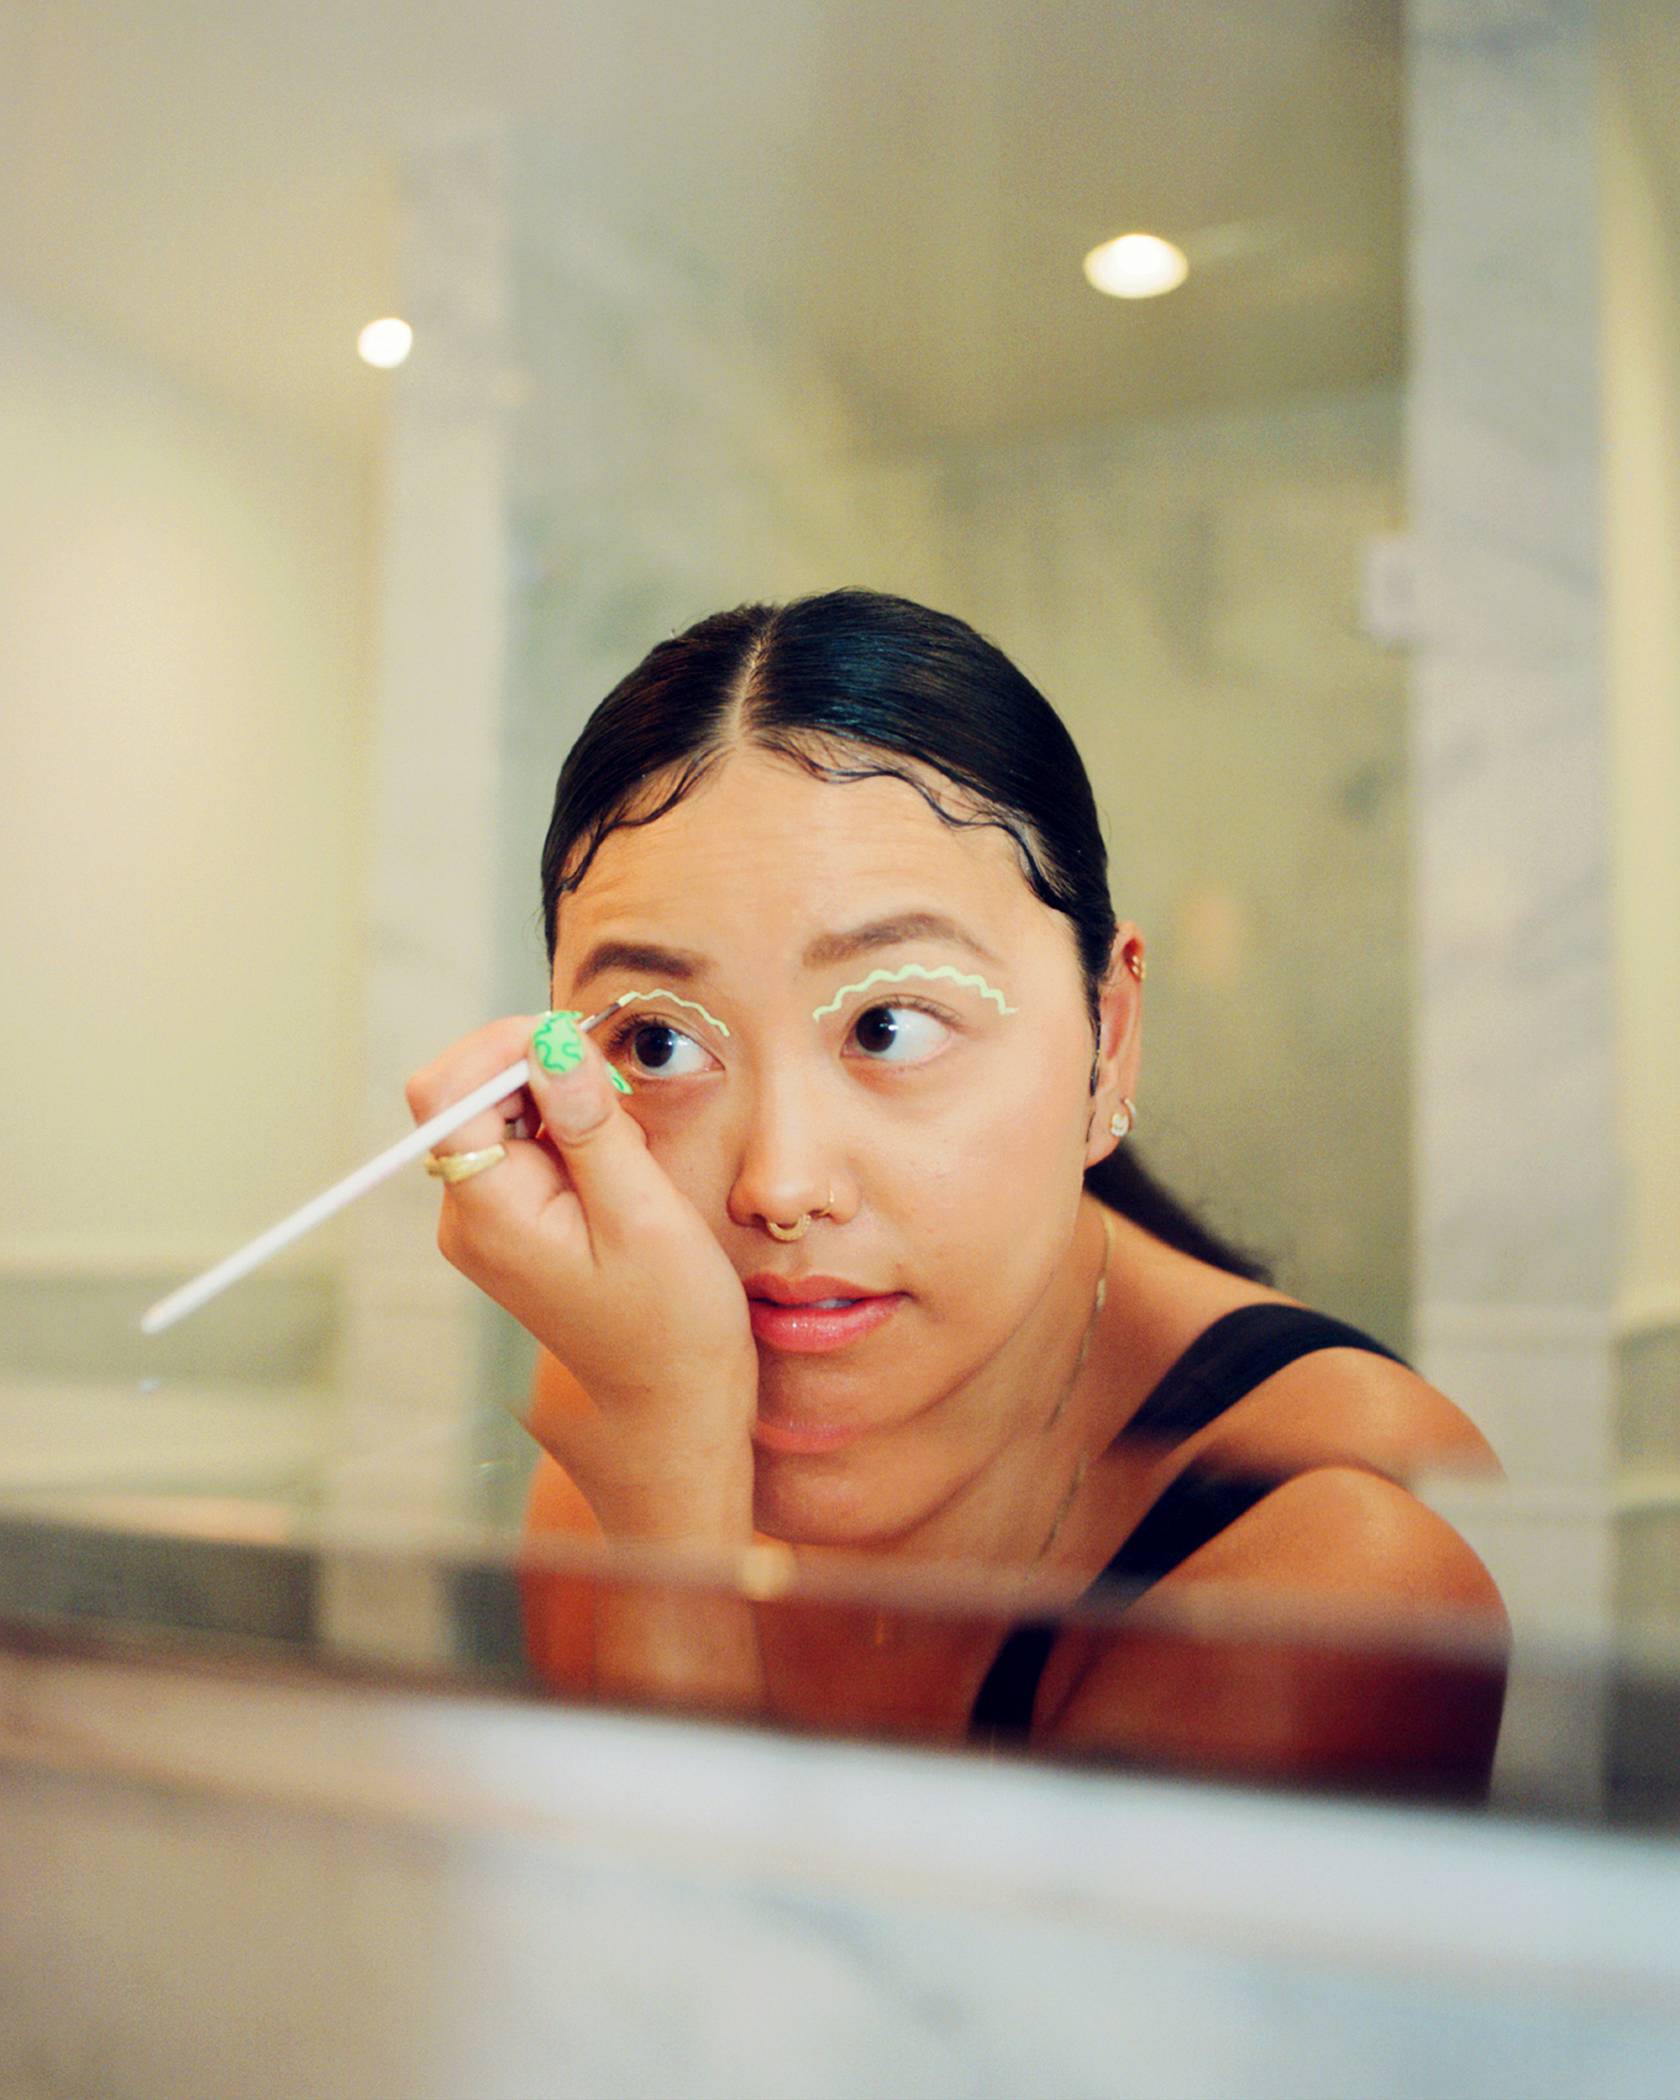 Jezz Chung putting on eye makeup in the mirror